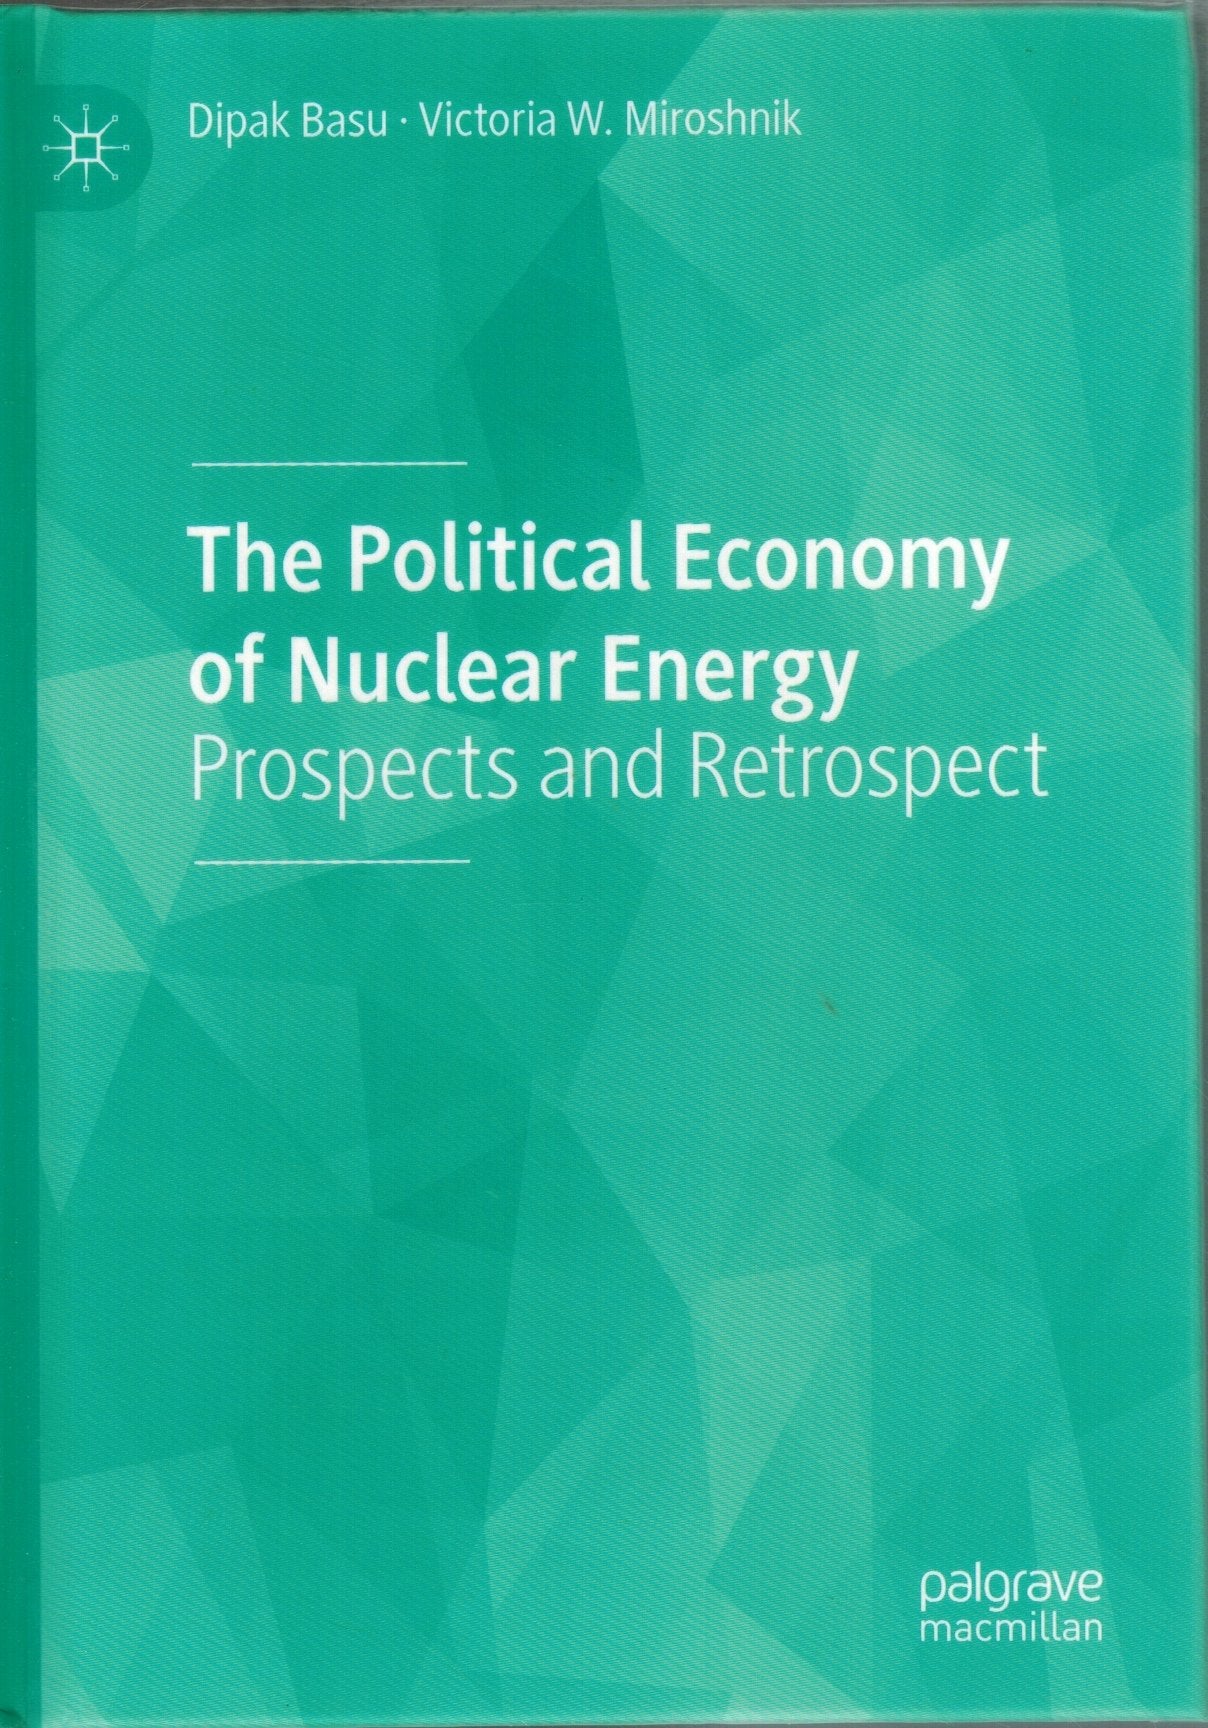 THE POLITICAL ECONOMY OF NUCLEAR ENERGY Prospects and Retrospect  by Basu, Dipak & Victoria W. Miroshnik